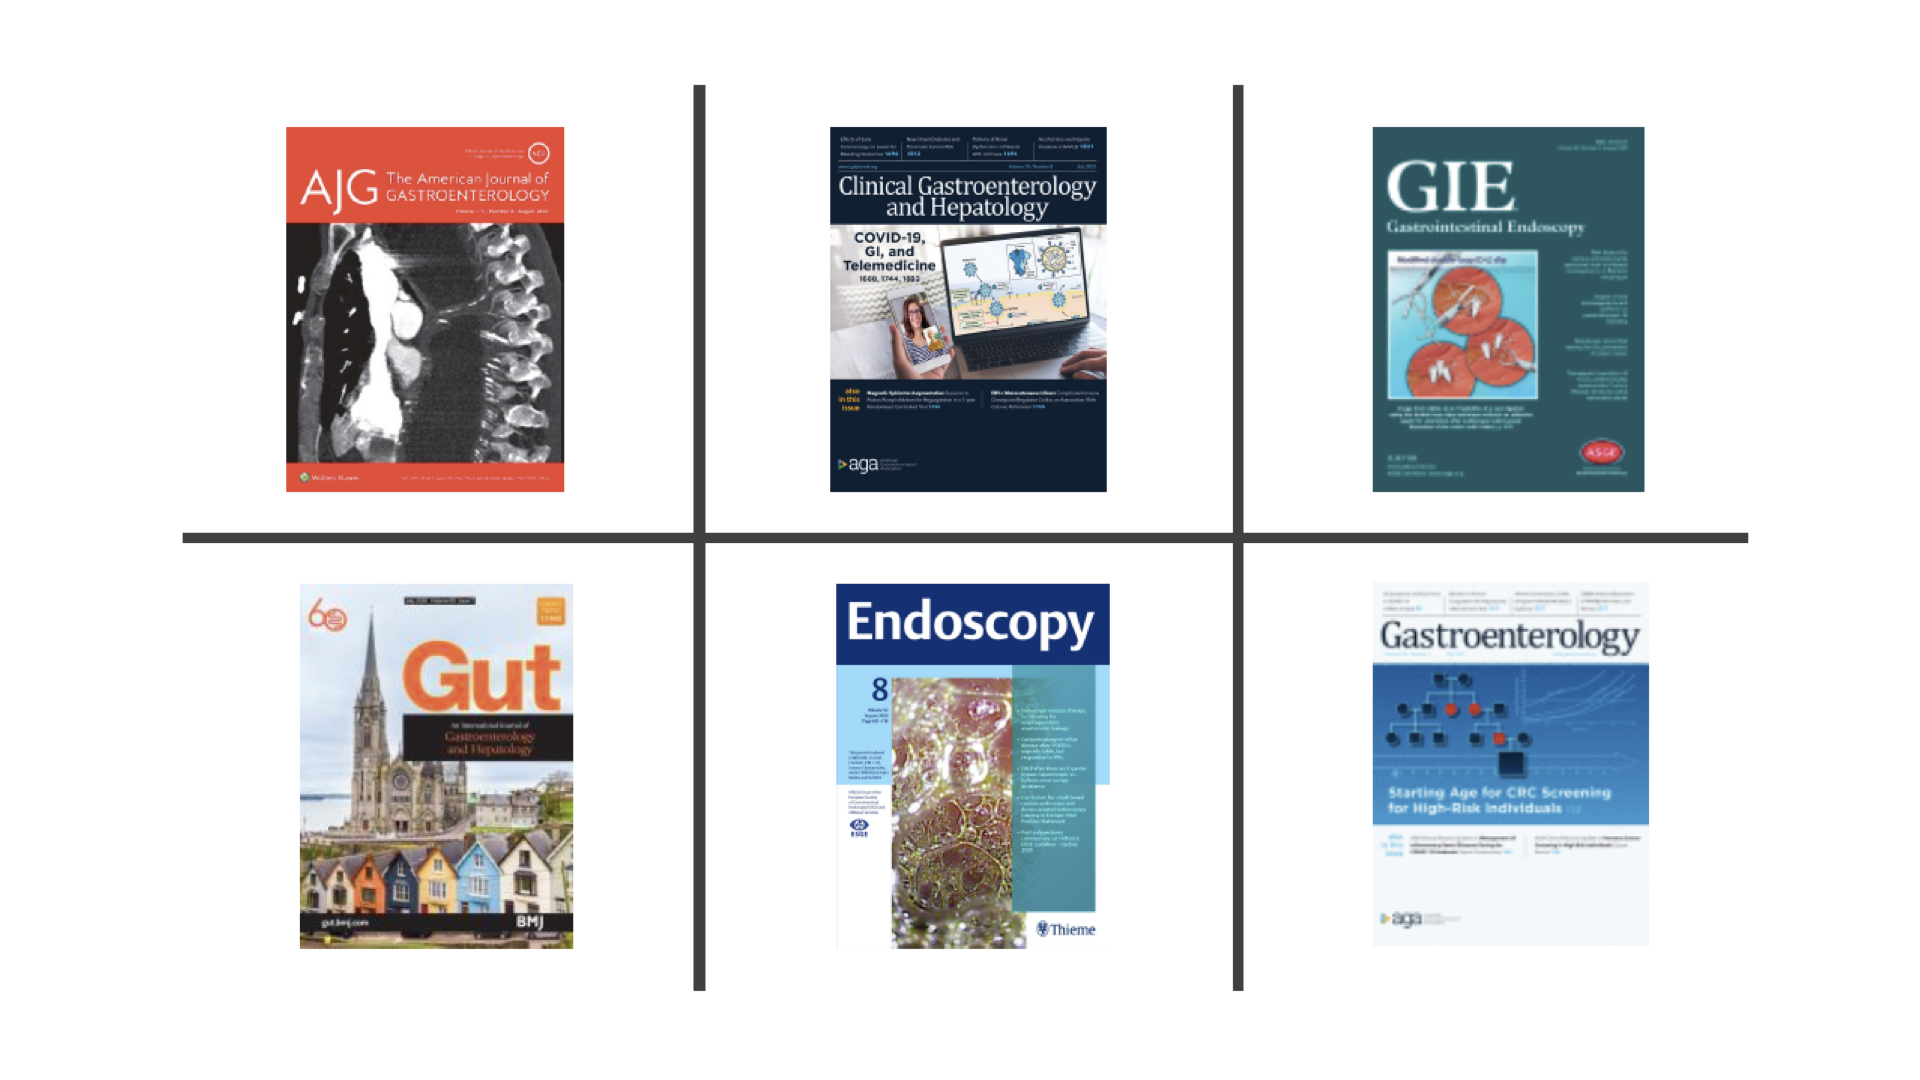 This is image of gastroenterology medical journals